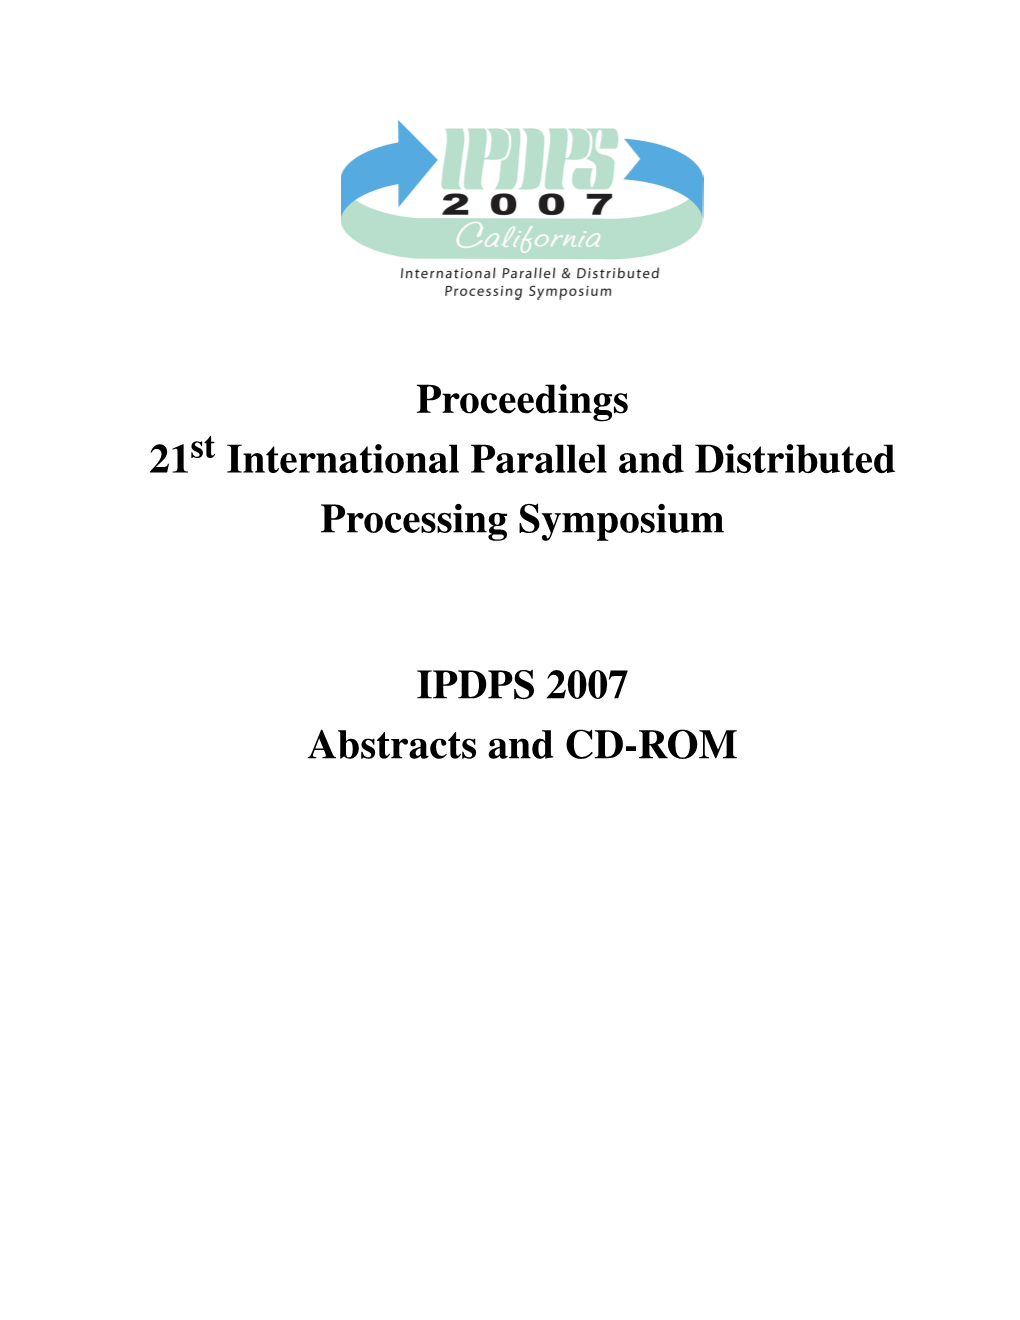 International Parallel and Distributed Processing Symposium IPDPS 2007